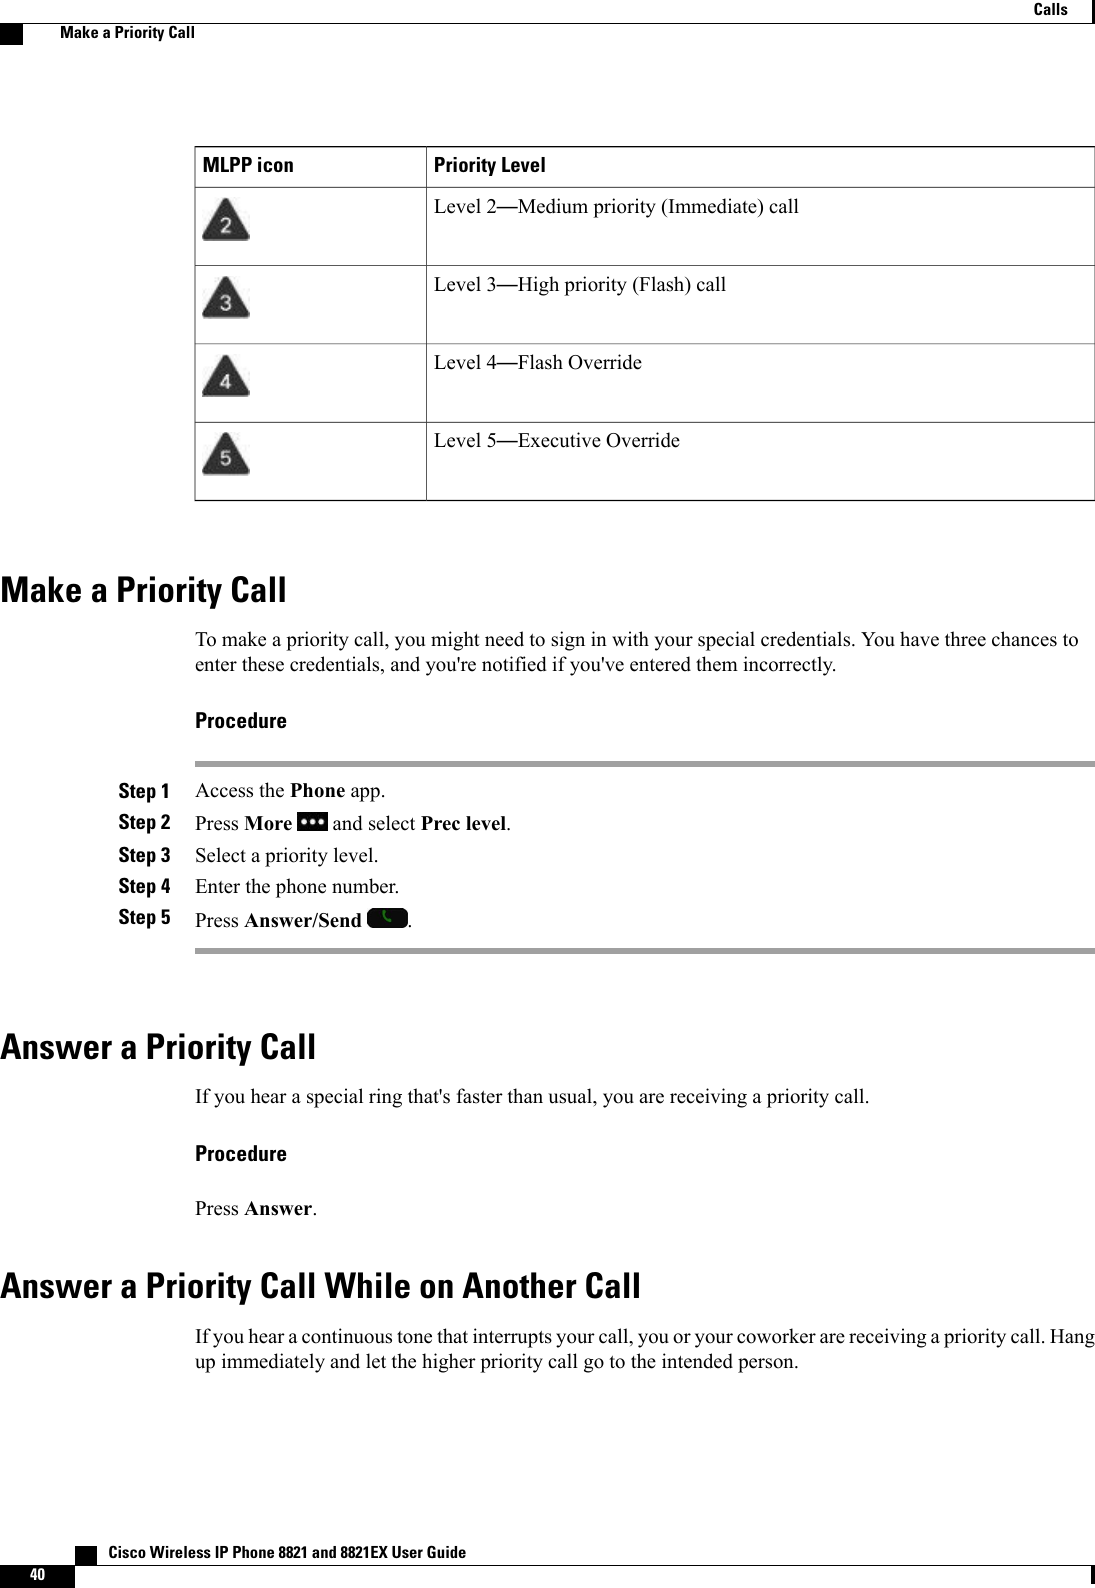 Priority LevelMLPP iconLevel 2—Medium priority (Immediate) callLevel 3—High priority (Flash) callLevel 4—Flash OverrideLevel 5—Executive OverrideMake a Priority CallTo make a priority call, you might need to sign in with your special credentials. You have three chances toenter these credentials, and you&apos;re notified if you&apos;ve entered them incorrectly.ProcedureStep 1 Access the Phone app.Step 2 Press More and select Prec level.Step 3 Select a priority level.Step 4 Enter the phone number.Step 5 Press Answer/Send .Answer a Priority CallIf you hear a special ring that&apos;s faster than usual, you are receiving a priority call.ProcedurePress Answer.Answer a Priority Call While on Another CallIf you hear a continuous tone that interrupts your call, you or your coworker are receiving a priority call. Hangup immediately and let the higher priority call go to the intended person.   Cisco Wireless IP Phone 8821 and 8821EX User Guide40CallsMake a Priority Call